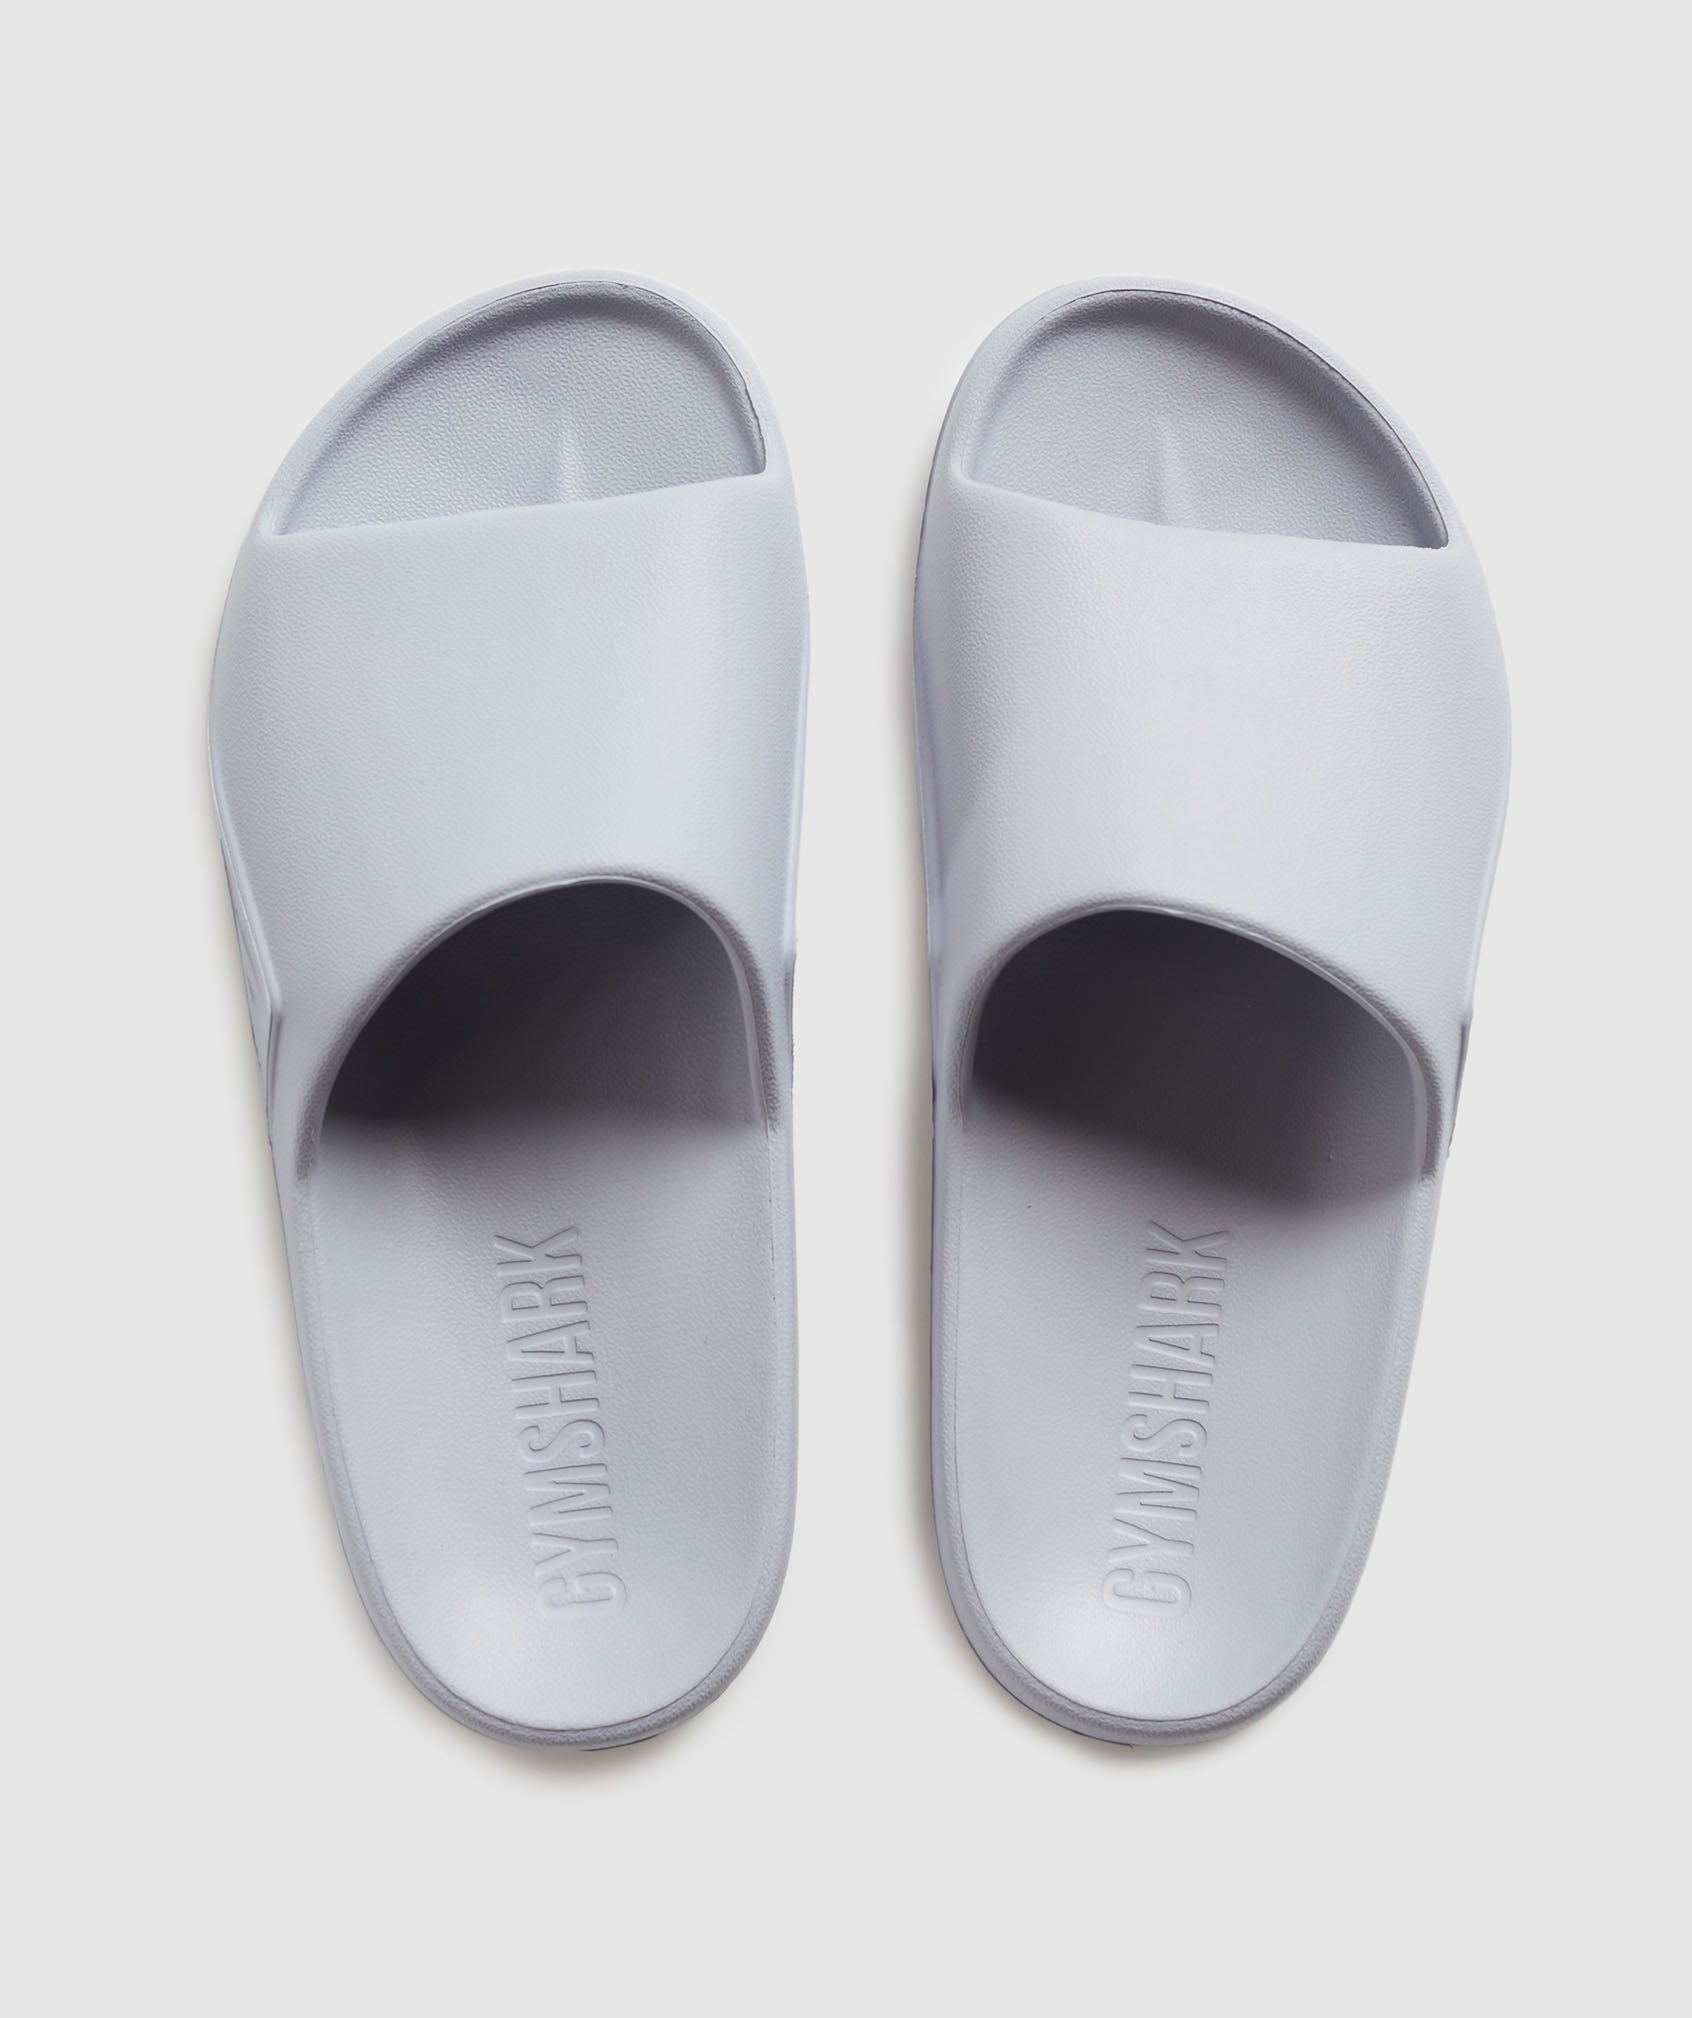 Rest Day Slides in Silver Lilac